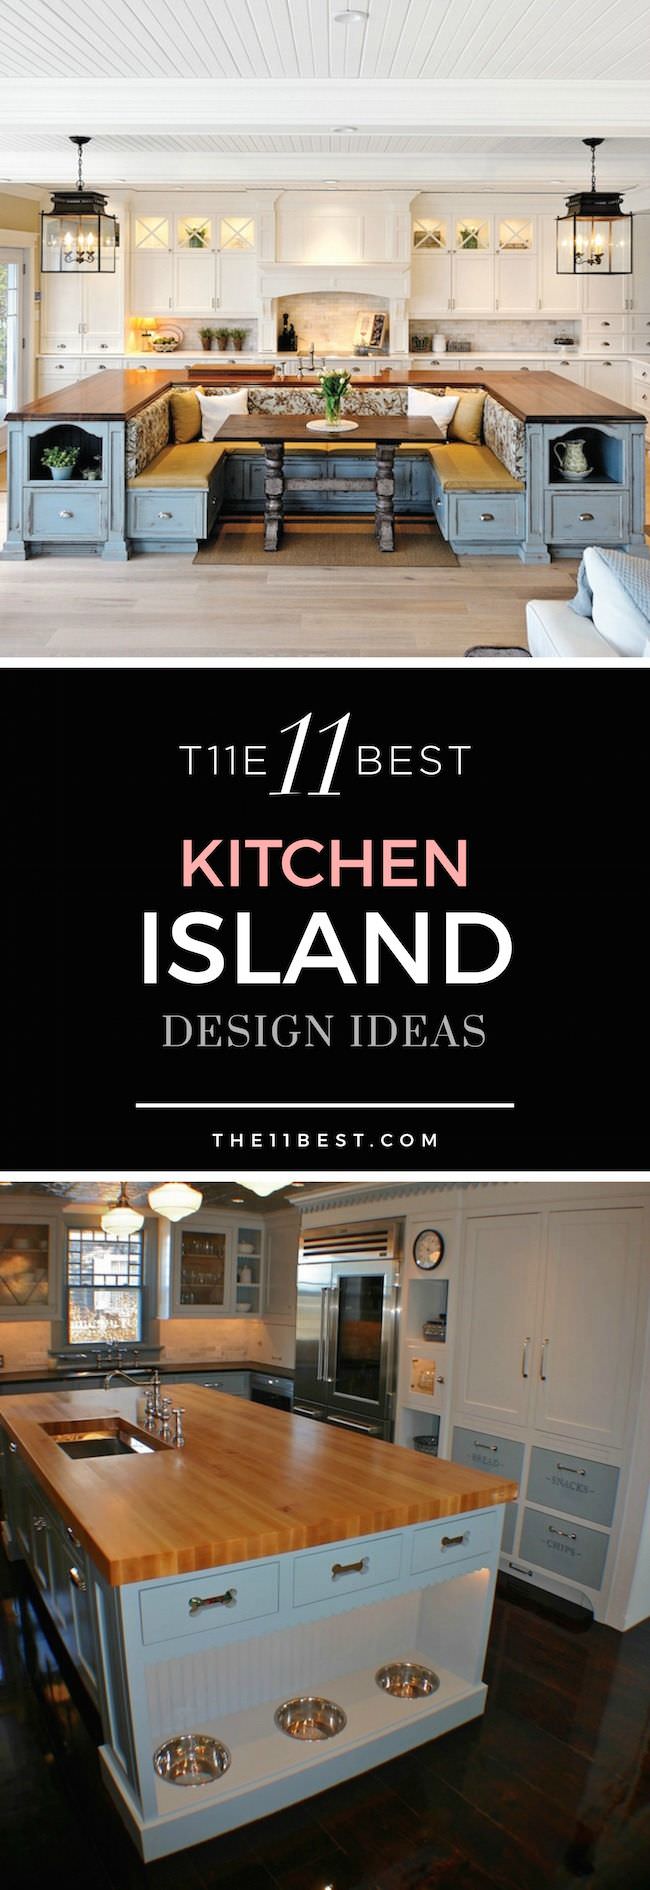 Kitchen islands make the kitchen more comfortable, functional and organized. Look at these 11 best kitchen islands for inspiration.